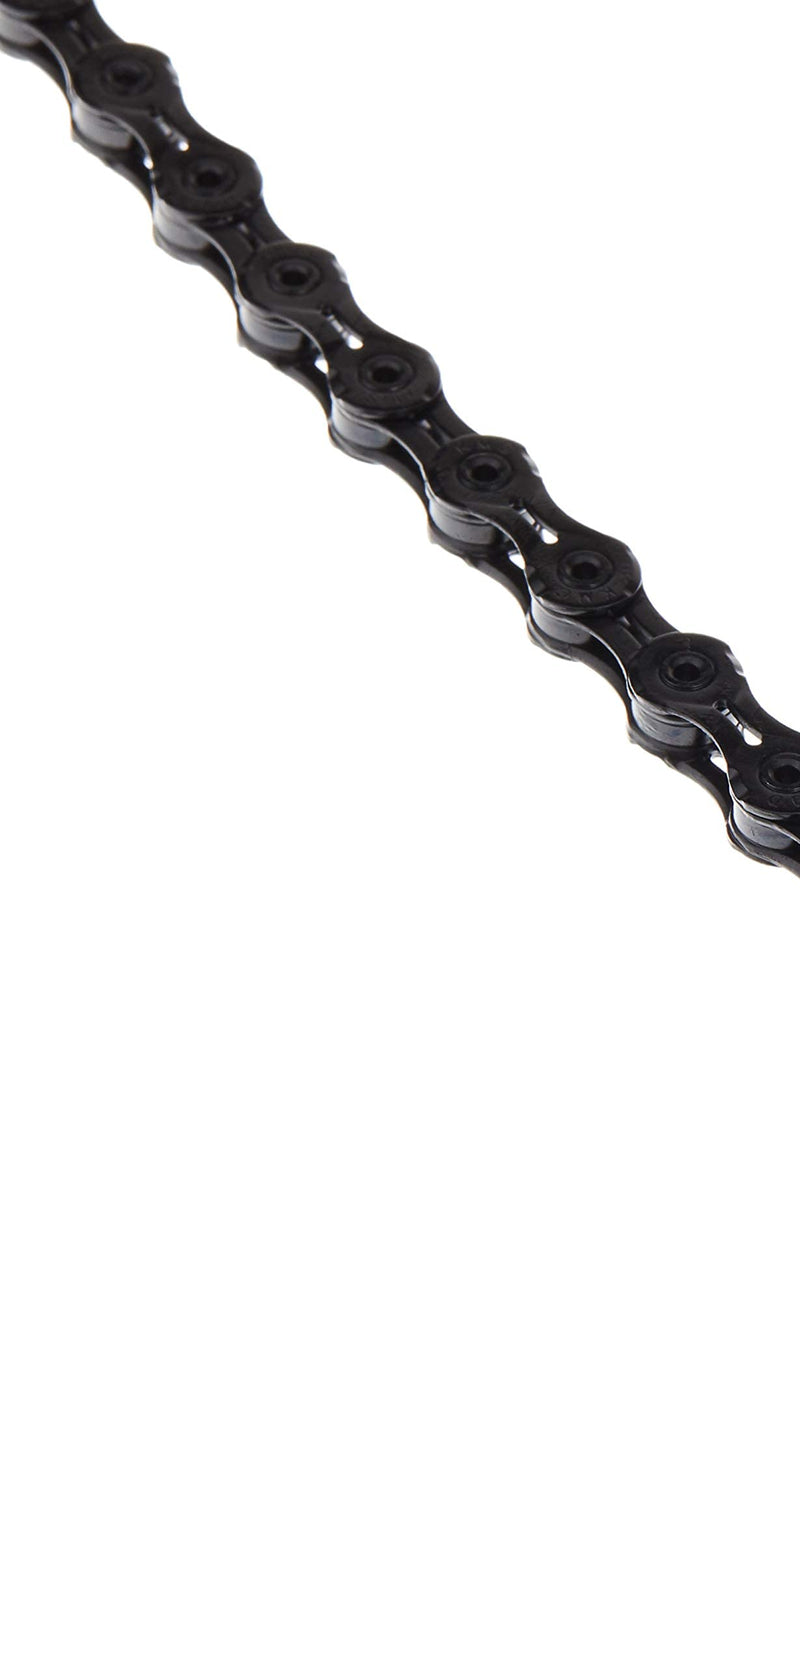 Load image into Gallery viewer, KMC X10SL DLC Bicycle Chain, 1/2 x 11/128-Inch, 116L, Black - RACKTRENDZ
